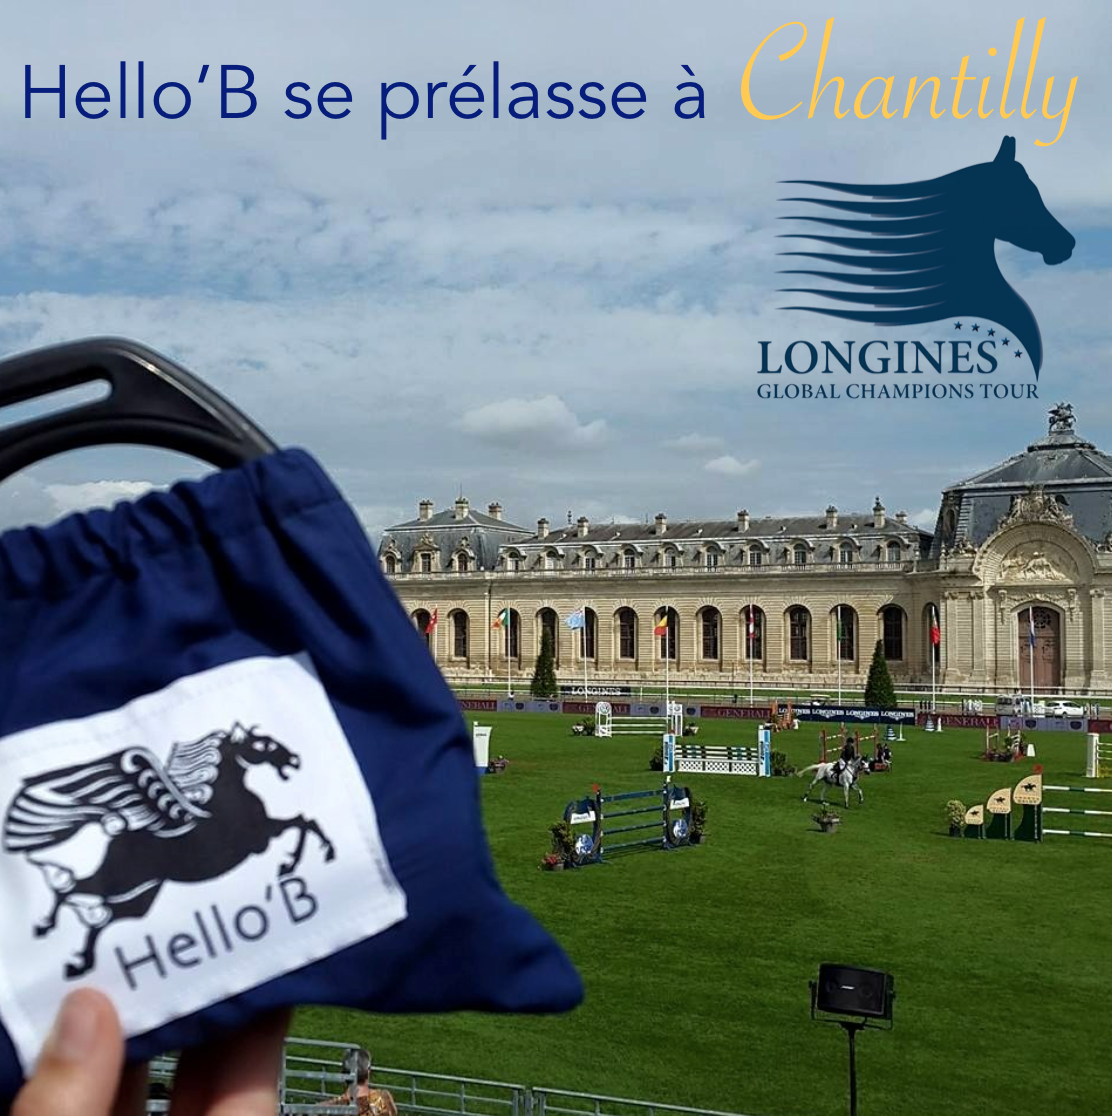 @HelloB_couture à Chantilly..
#longinesglobalchampiontour @Longines @GlobalChampTour @chantillydomain #hellobcouture